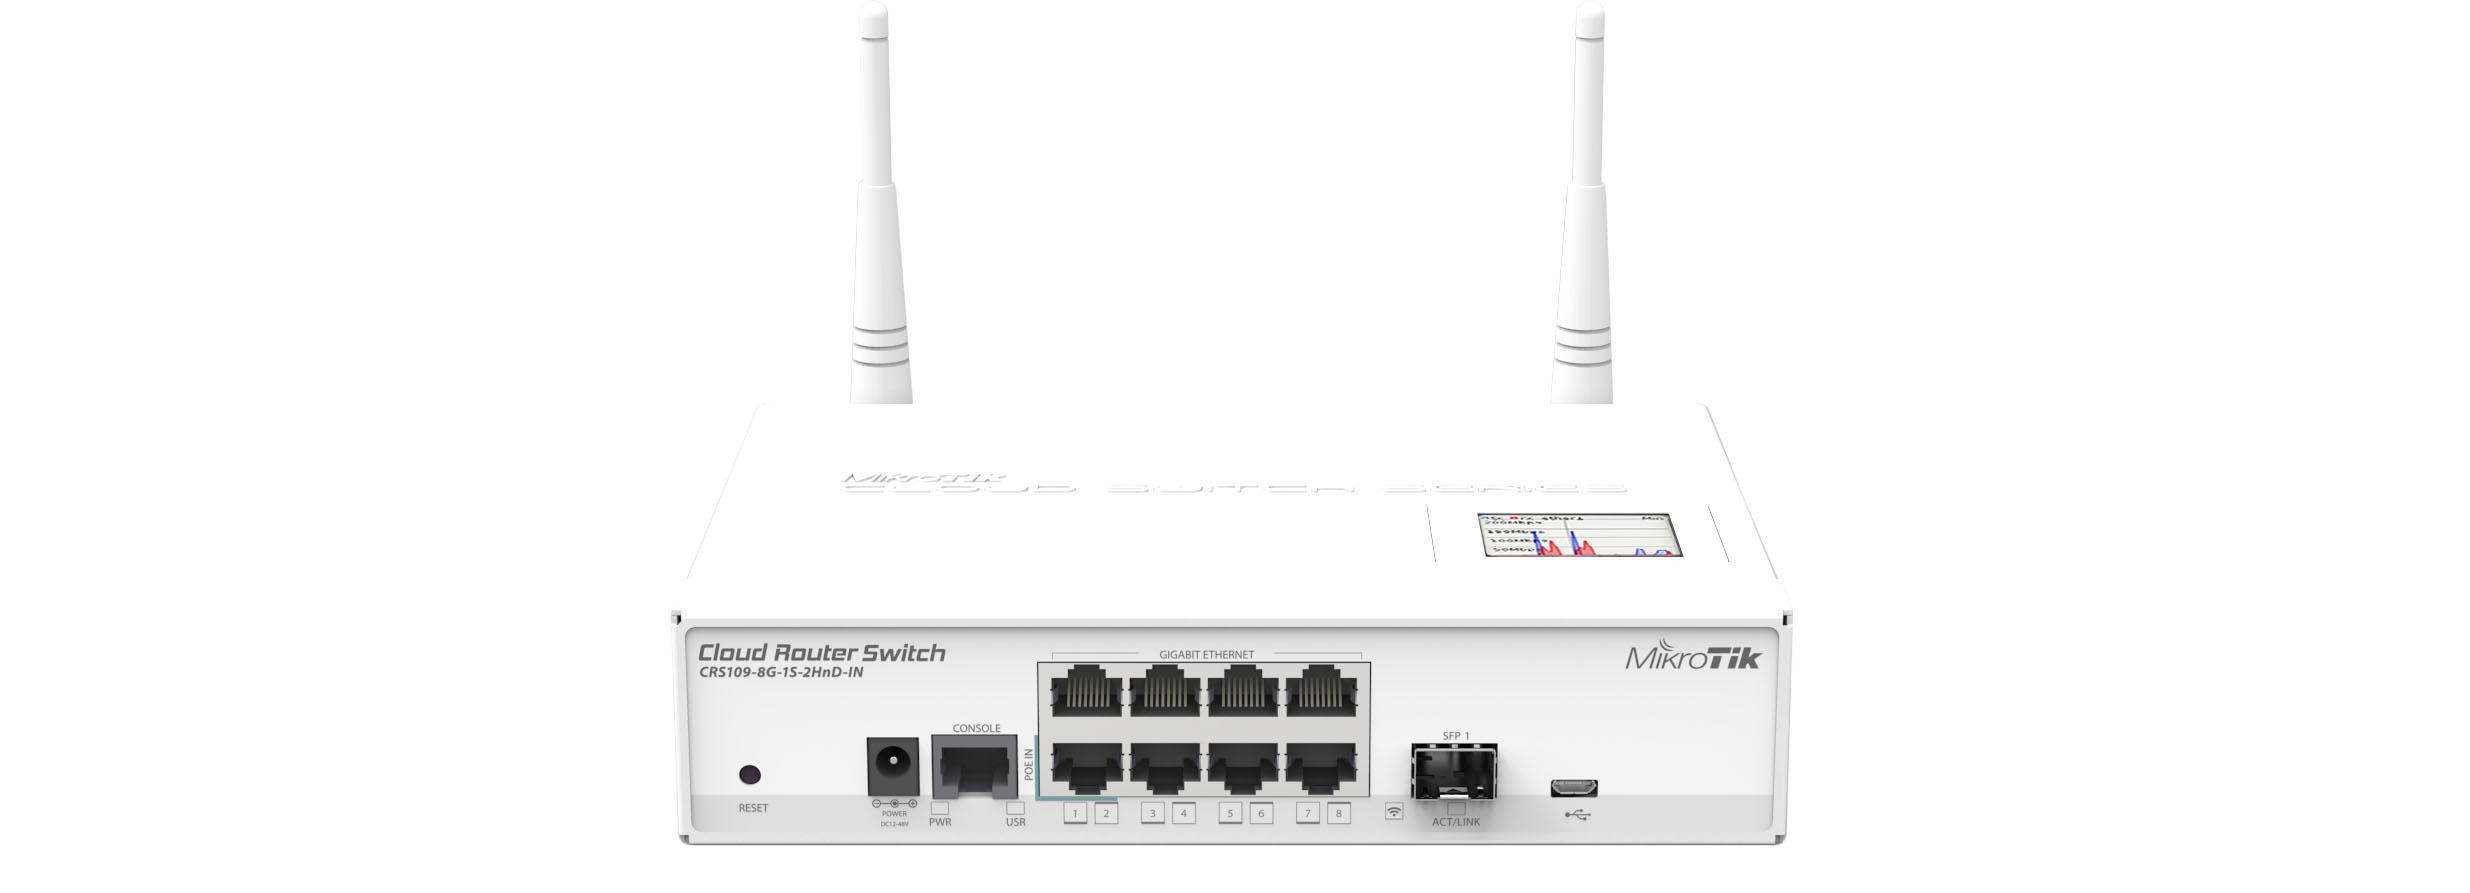 Mikrotik CRS109-8G-1S-2HnD-IN 8 PORT Gigabit Wireless Router Switch